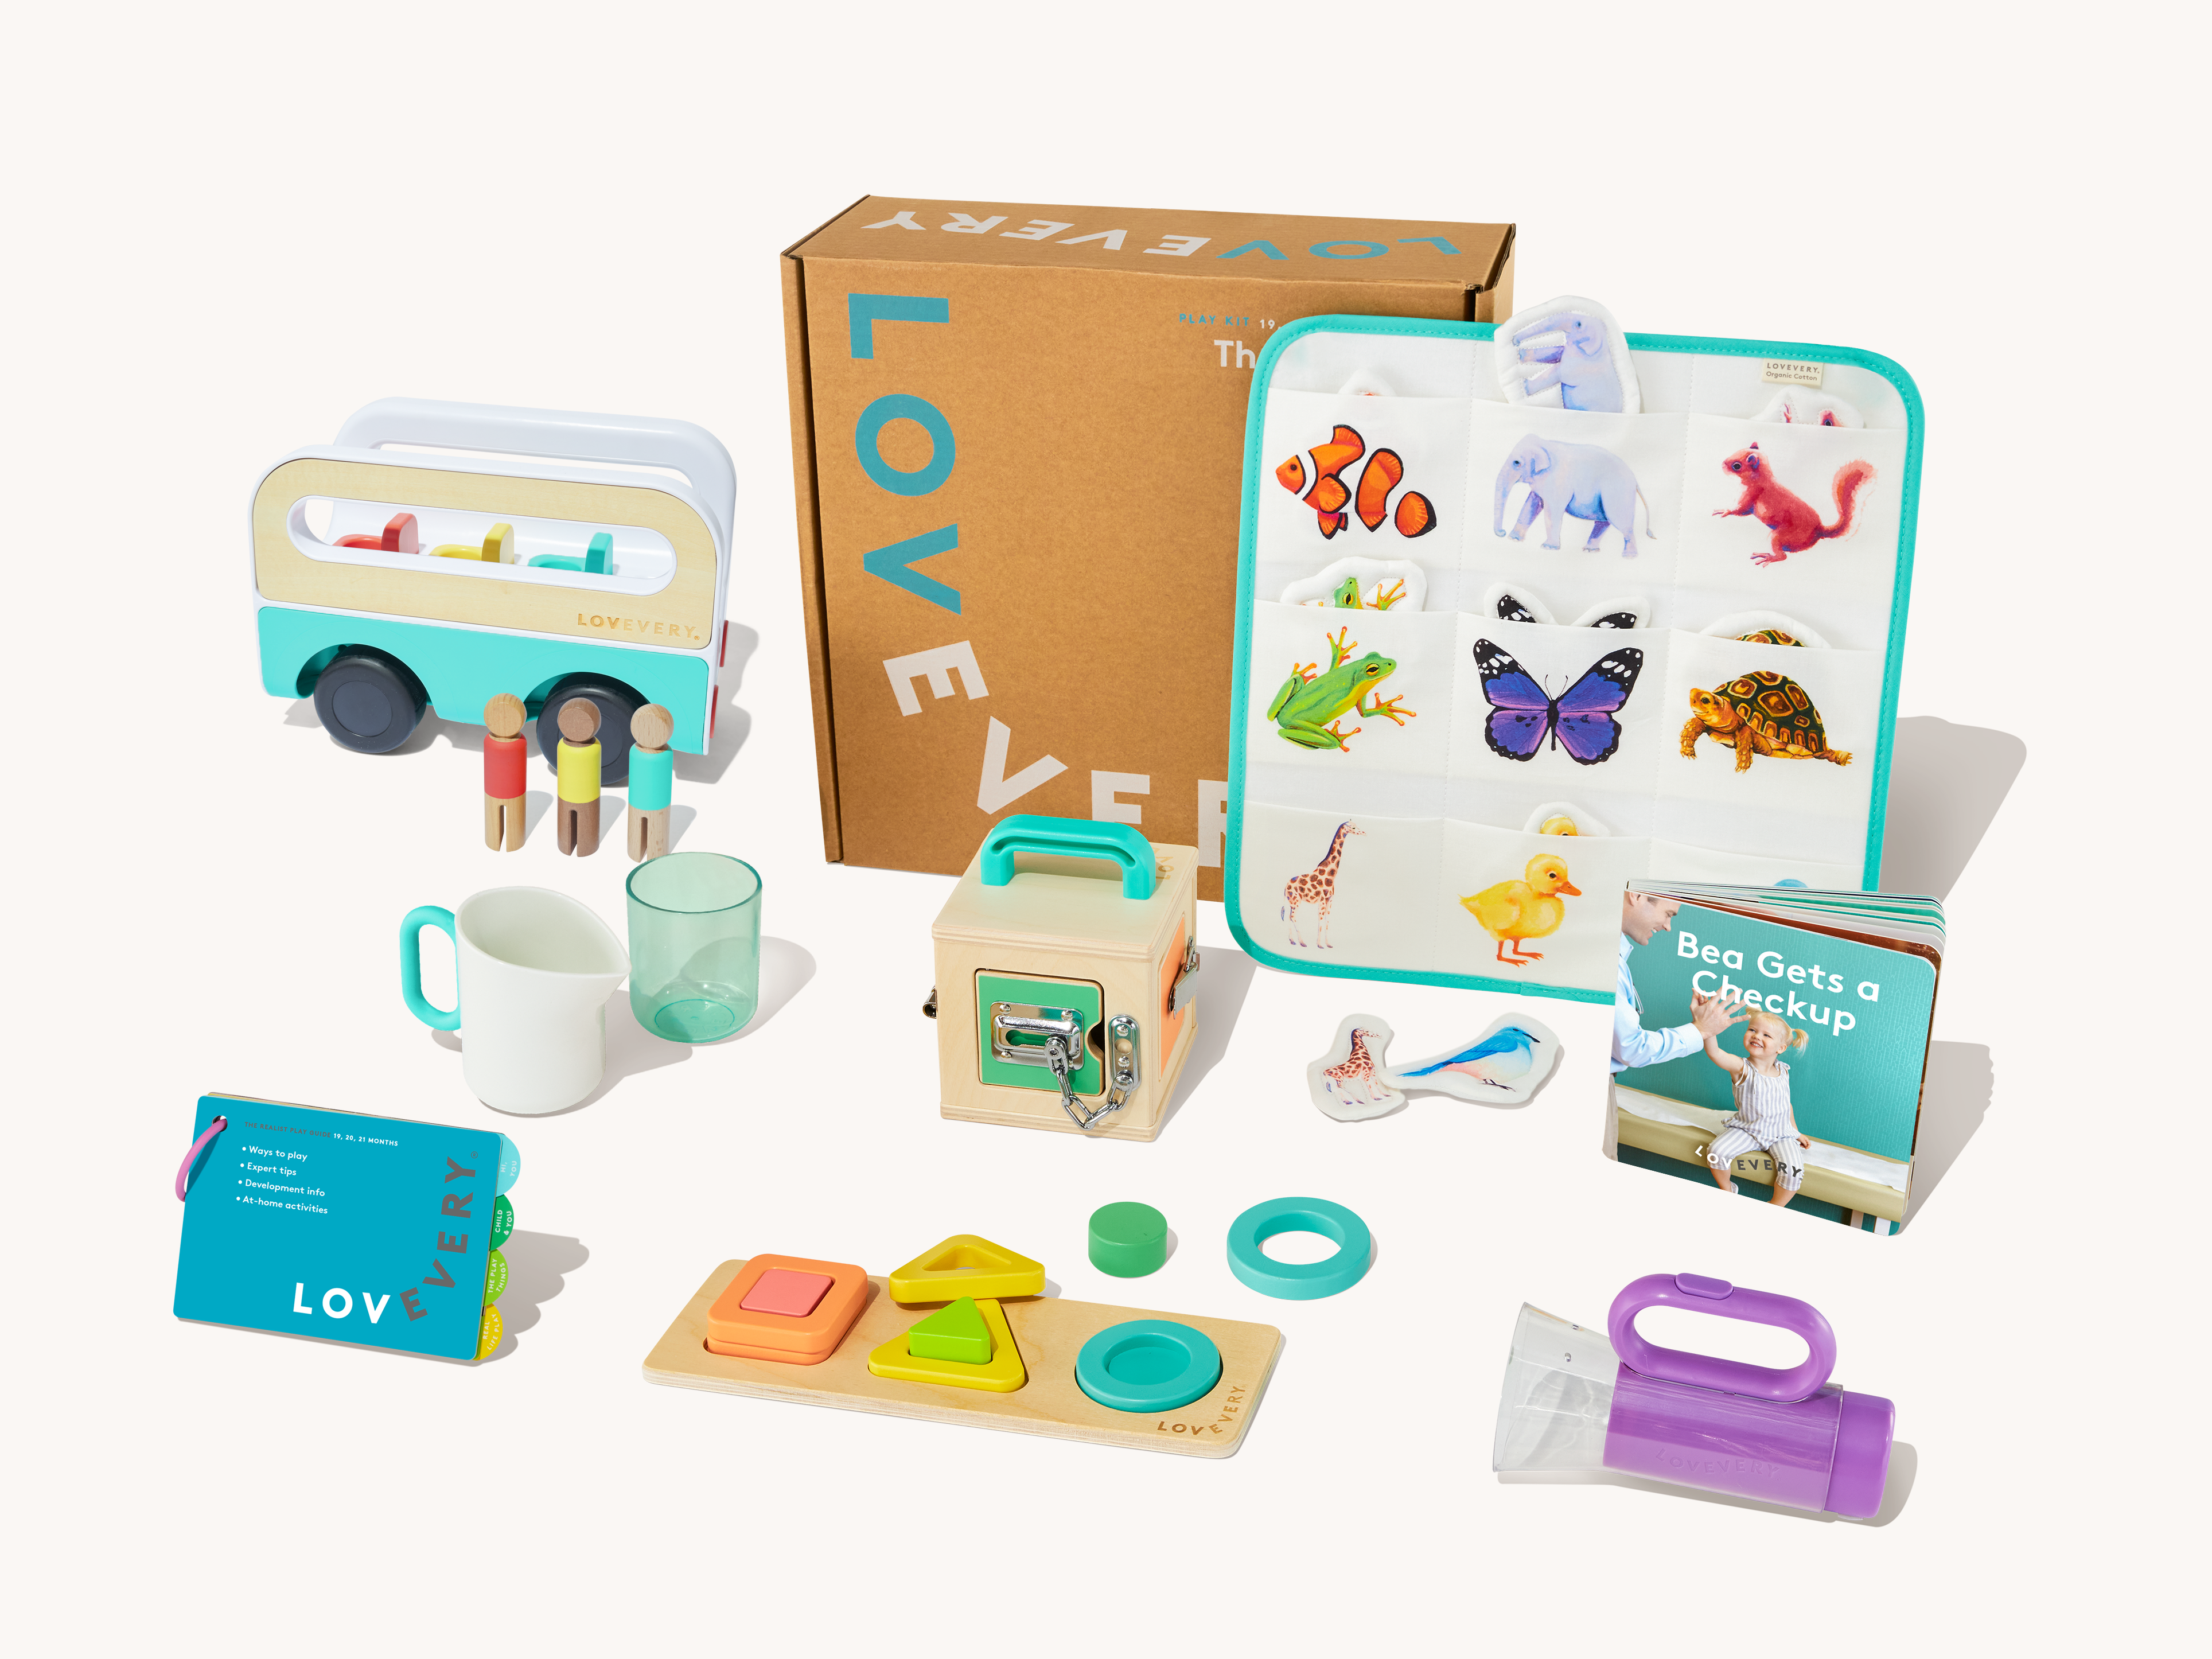 Is The Lovevery Subscription Worth It? - Montessori Toy Review